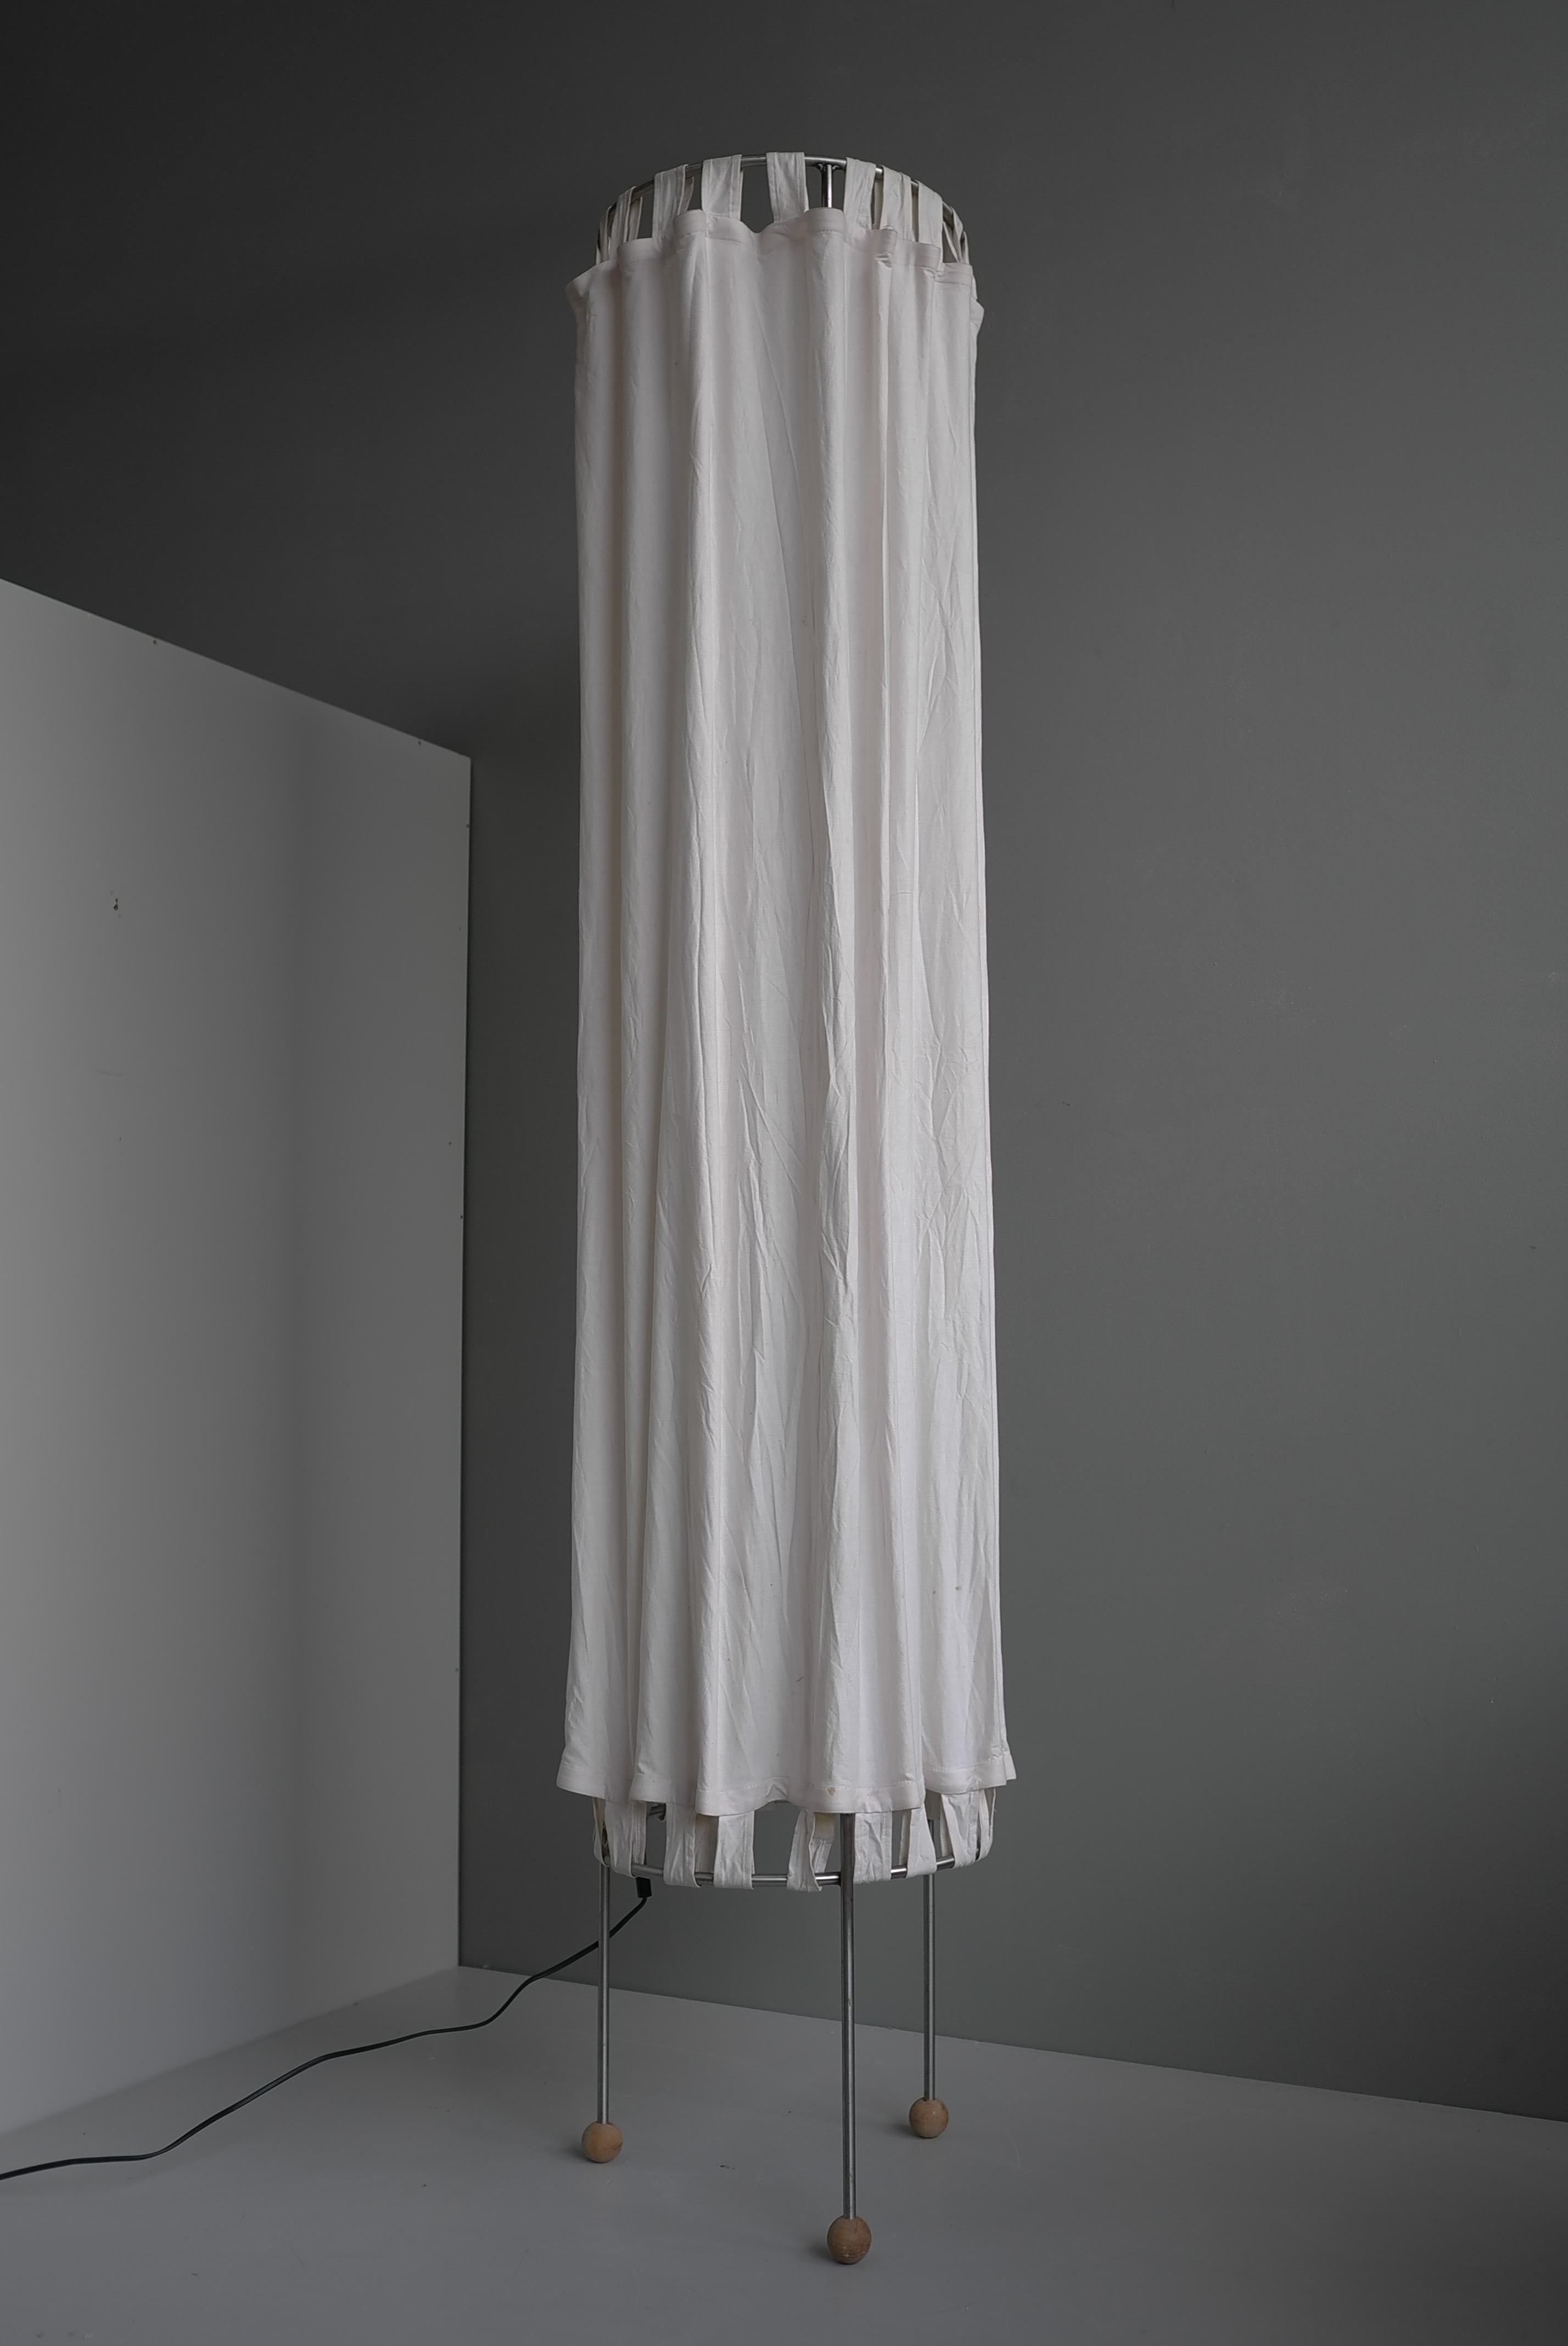 Metal Extra Large White Linen Curtain Floorlamp, The Netherlands 1980's For Sale